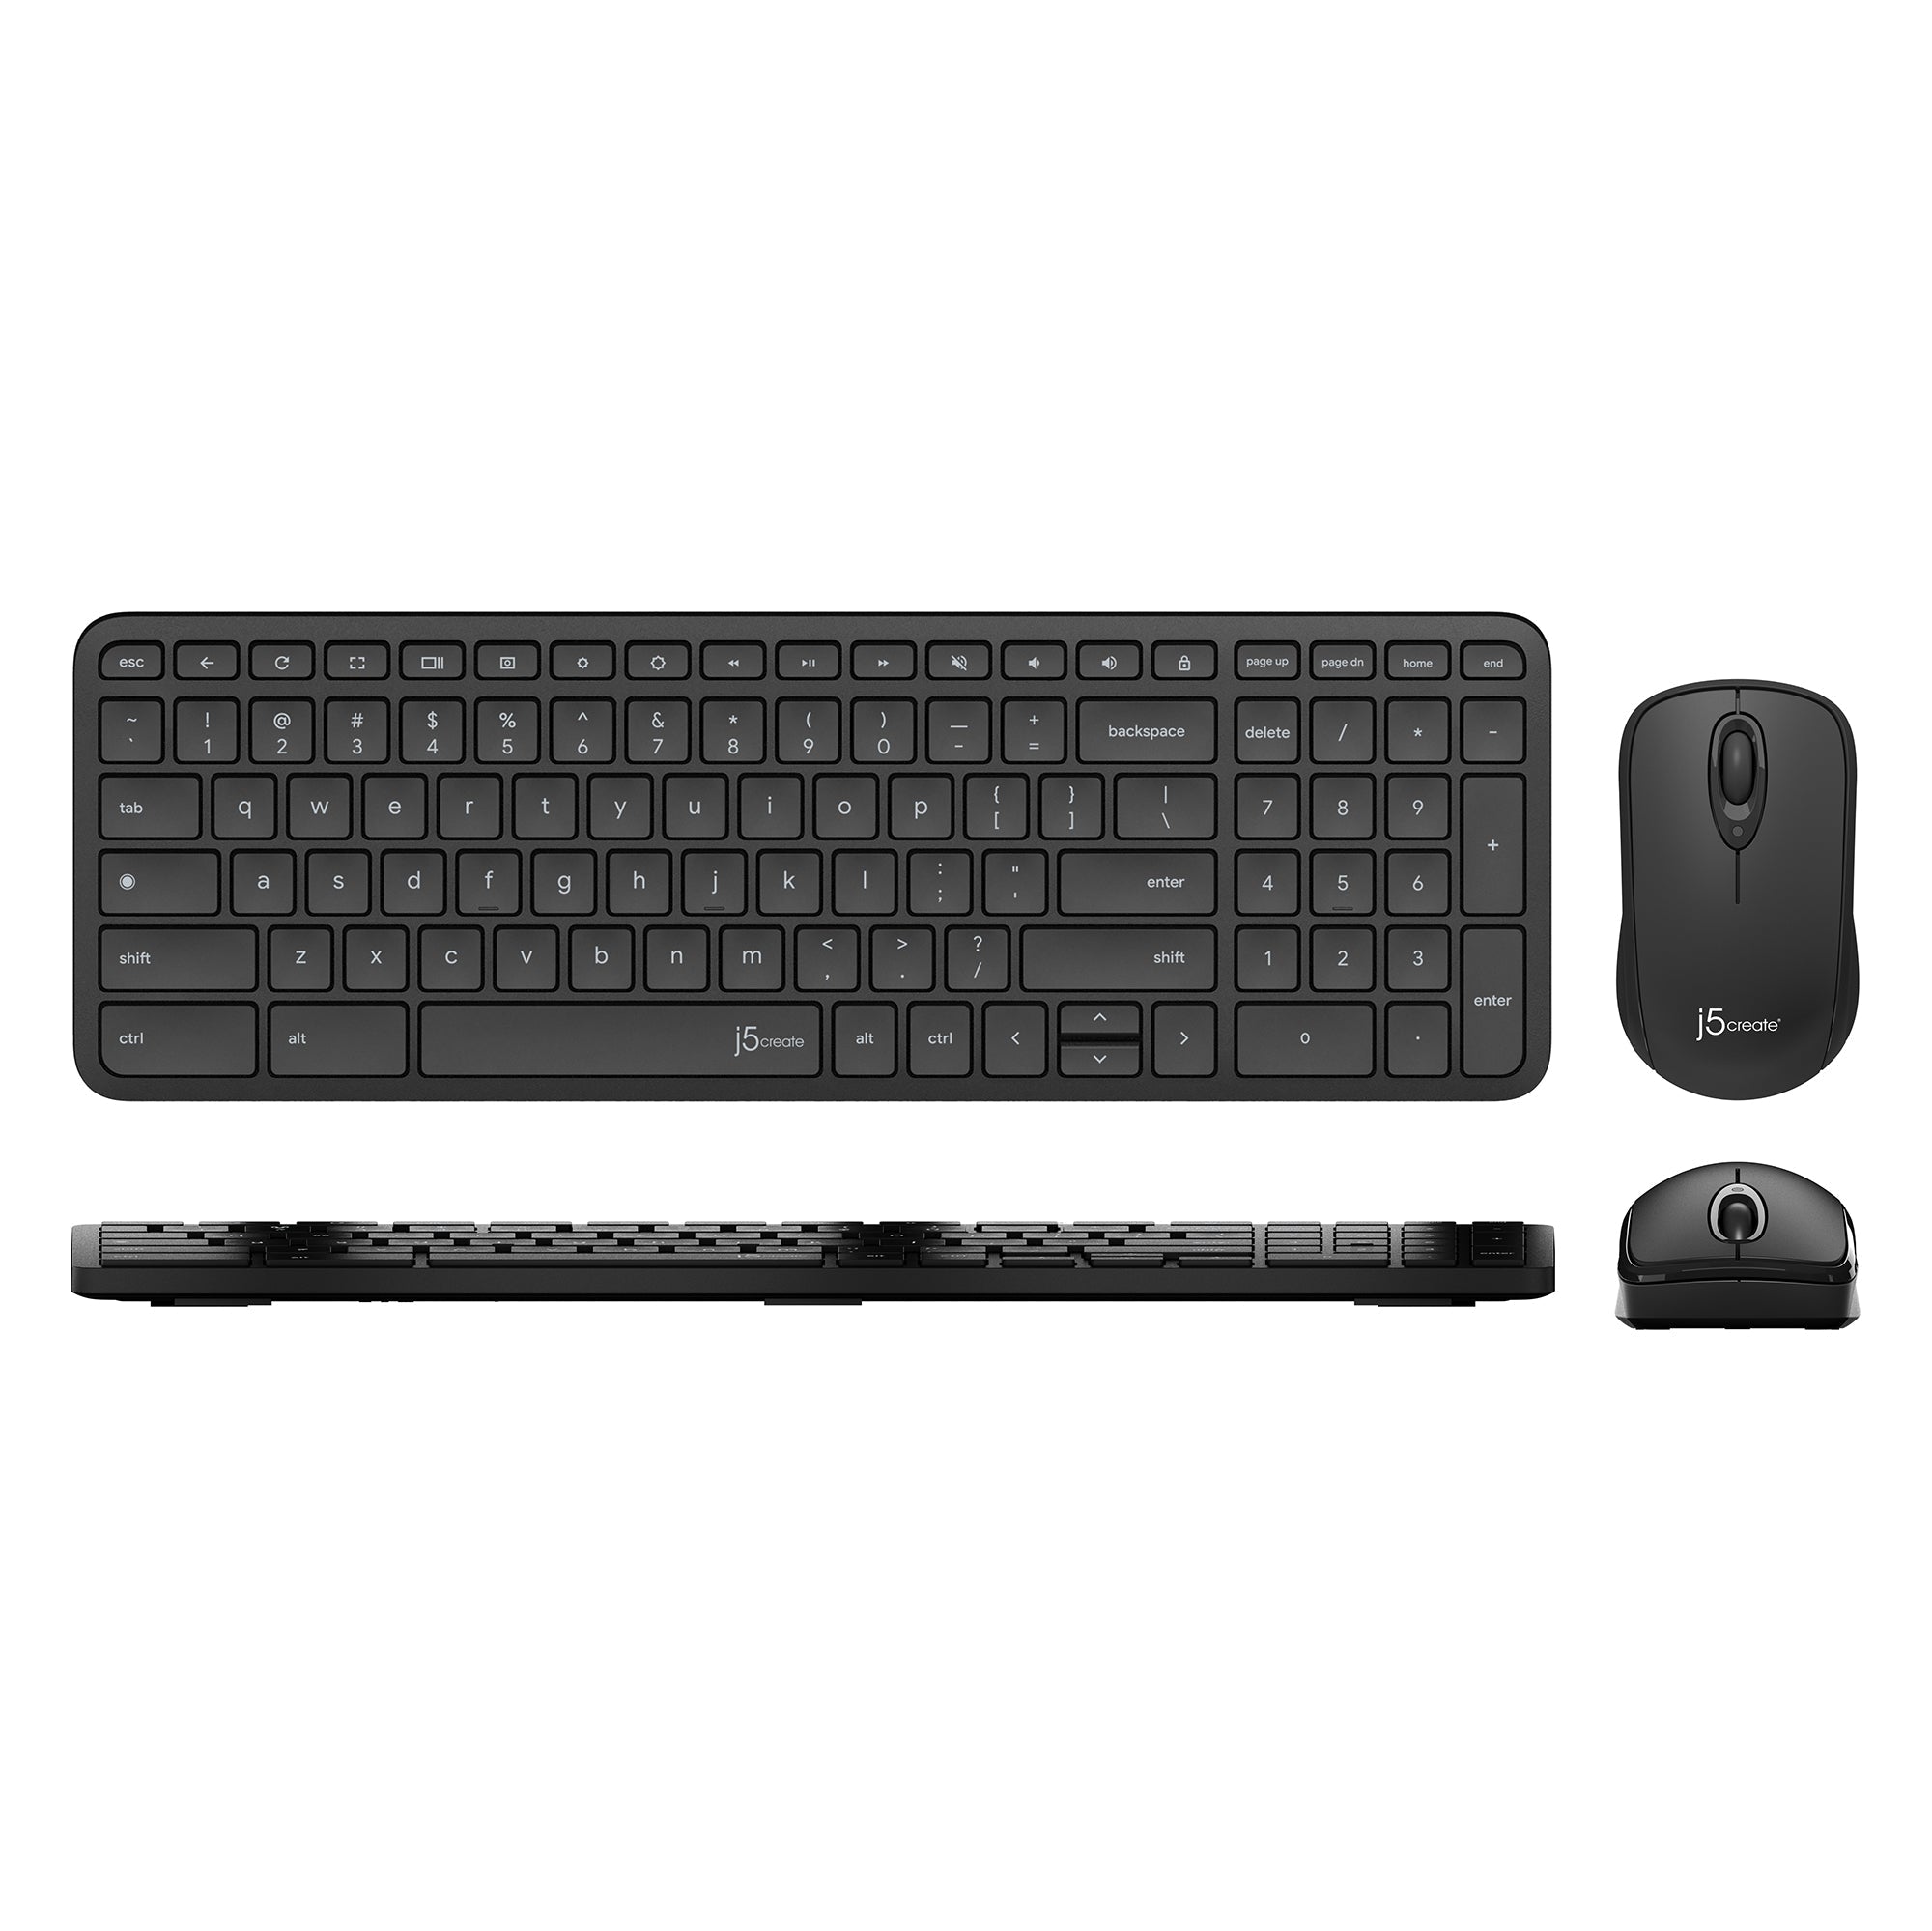 Mooie jurk beroemd Ontaarden Compact Wireless Keyboard and Mouse for Chrome OS™ – j5create